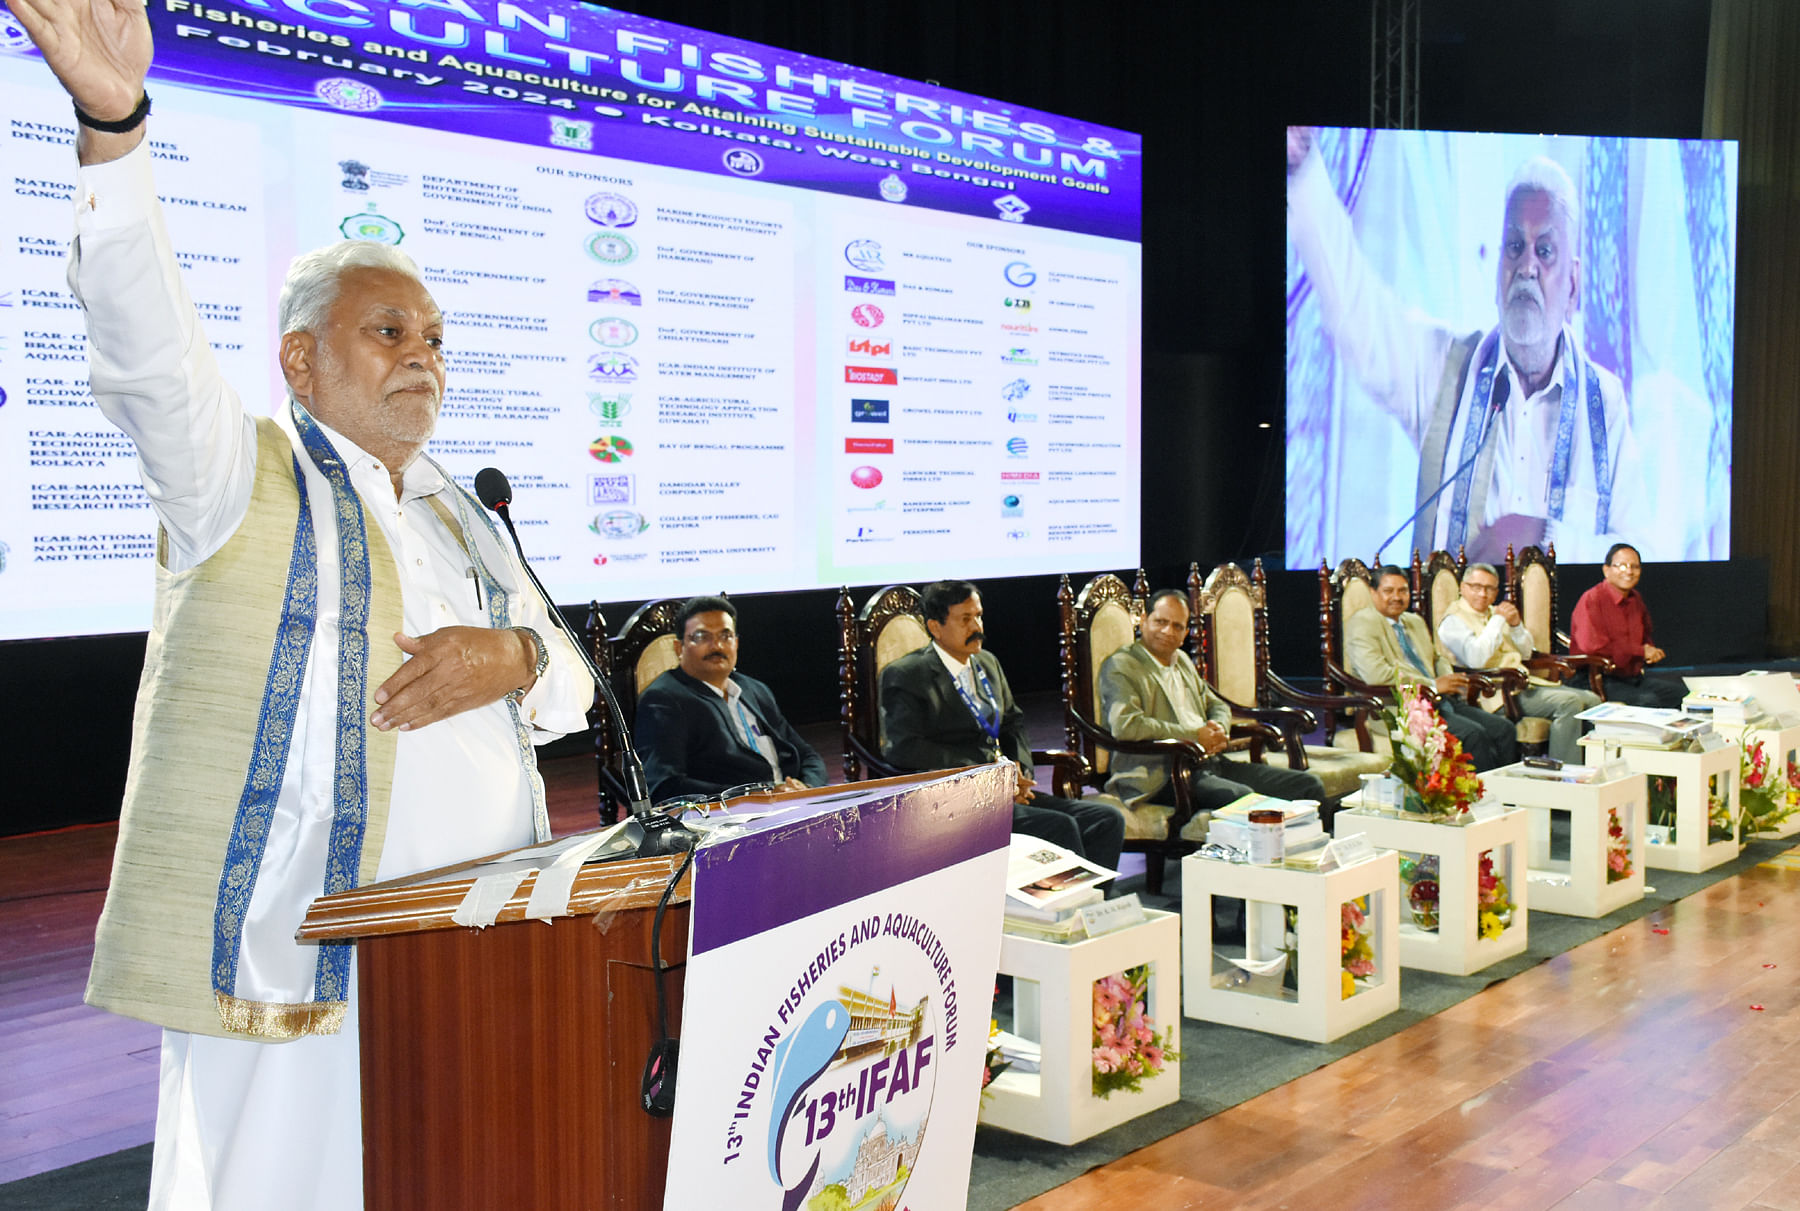 Parshottam Rupala, Minister of Fisheries, Animal Husbandry and Dairying at 13th Indian Fisheries and Aquaculture Forum